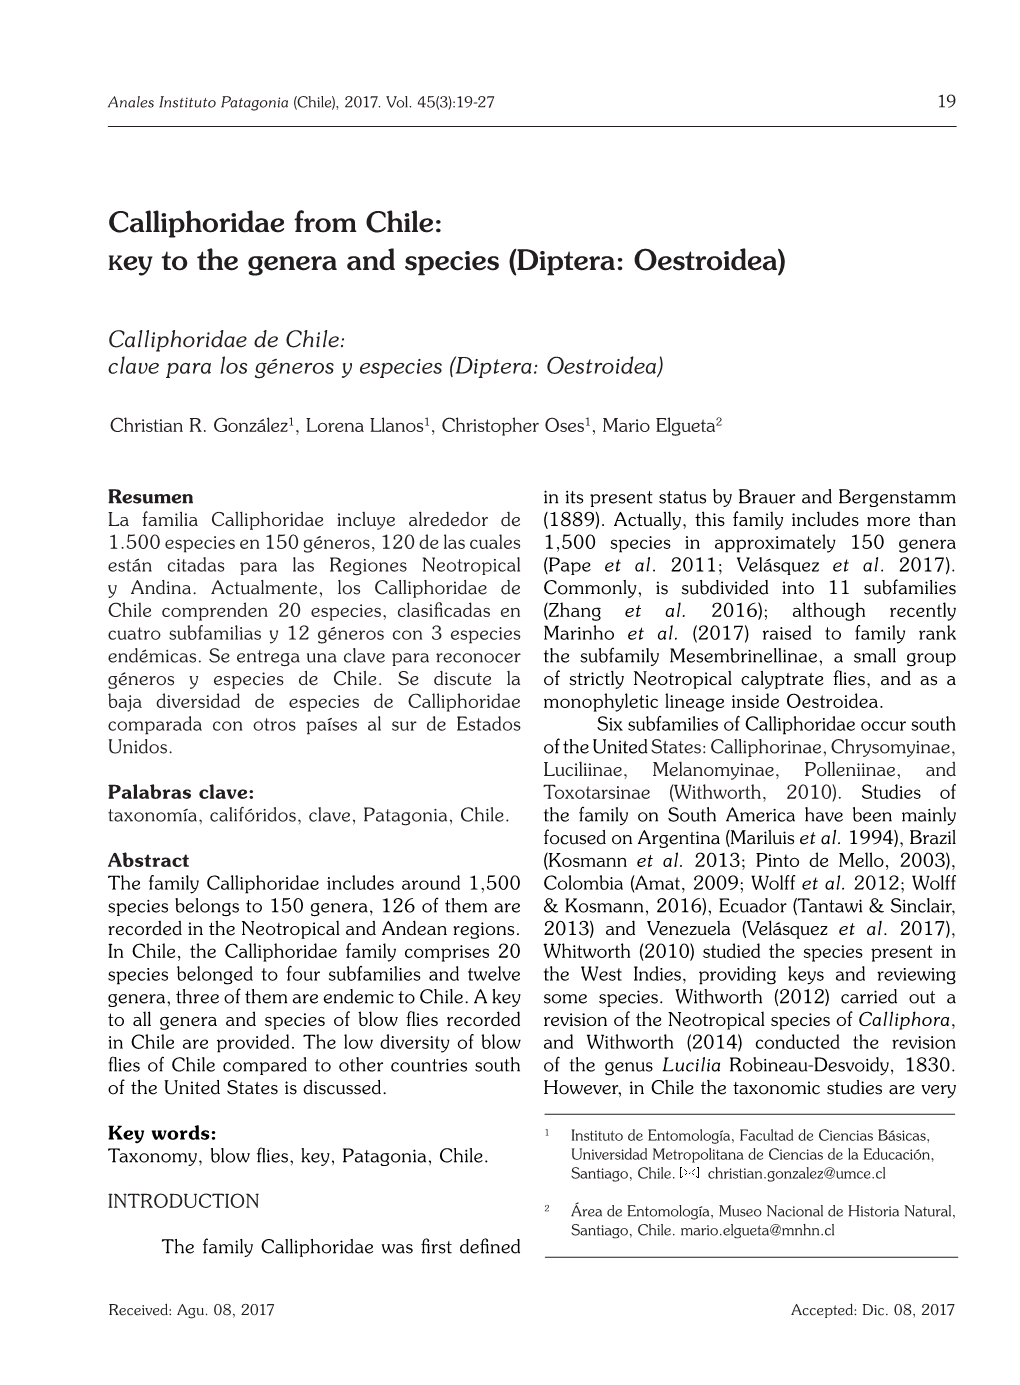 Calliphoridae from Chile: Key to the Genera and Species (Diptera: Oestroidea)